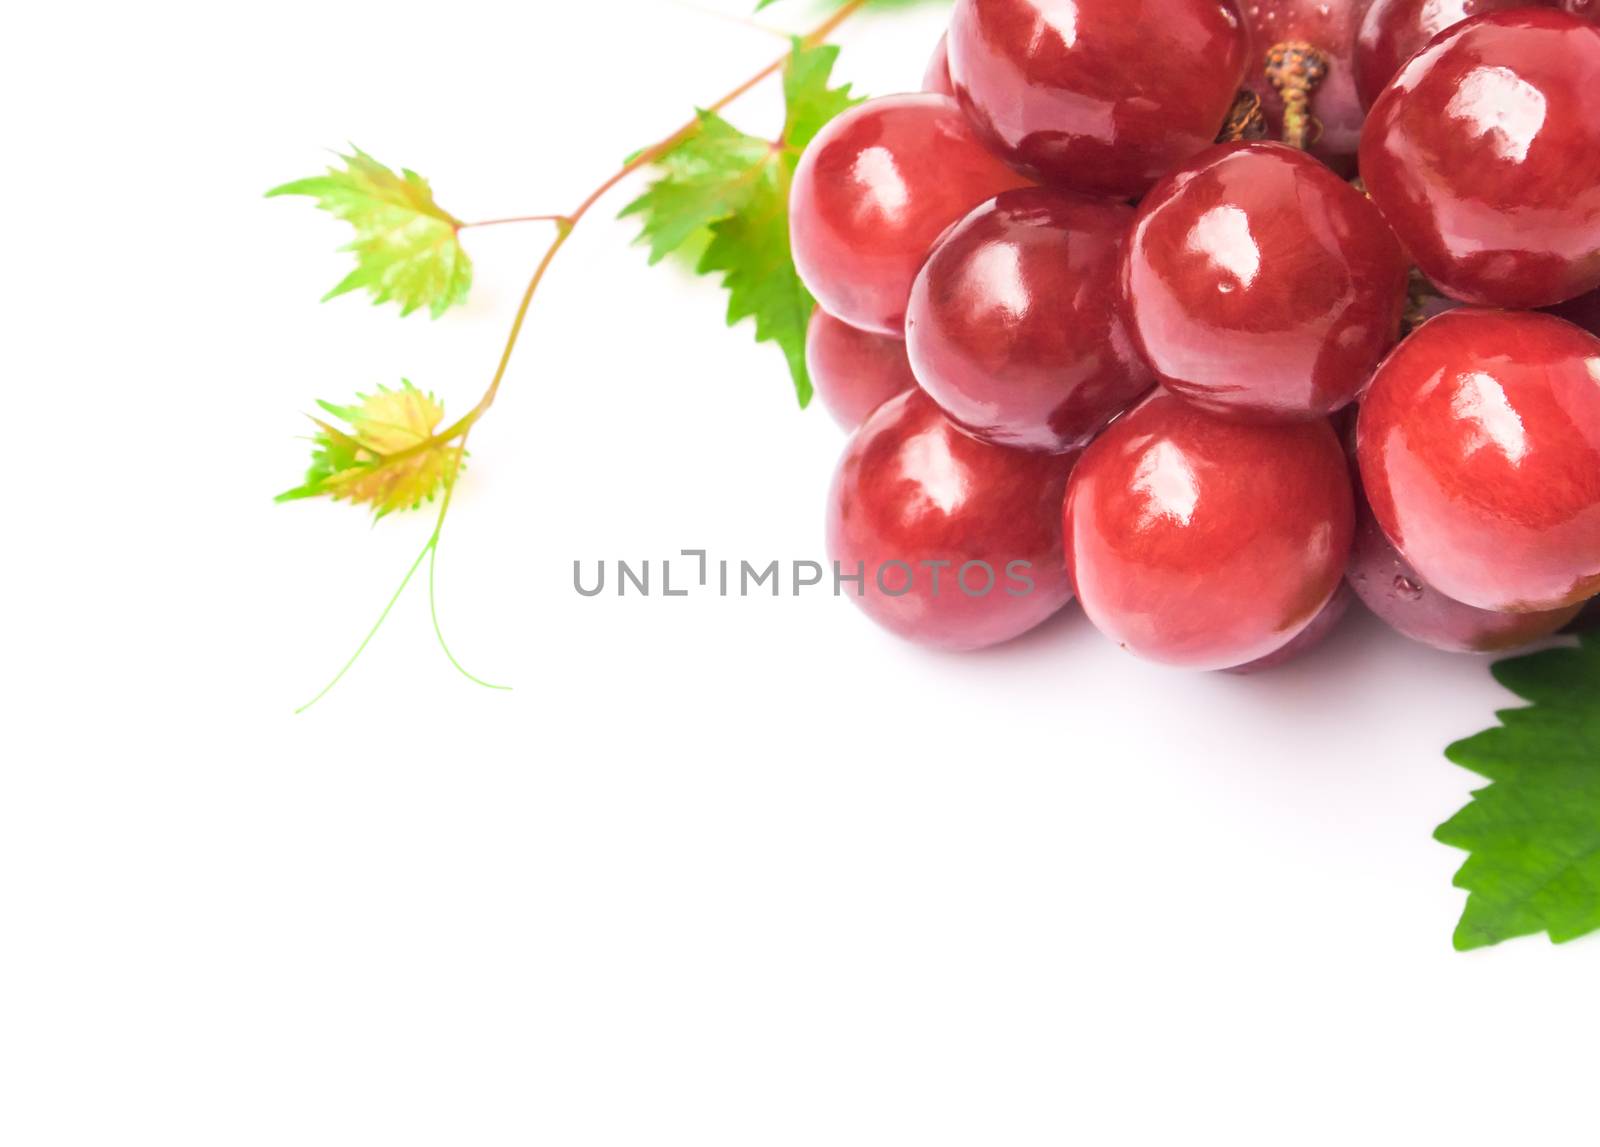 Closeup ripe red grape with leaf on white background, fruit heal by pt.pongsak@gmail.com